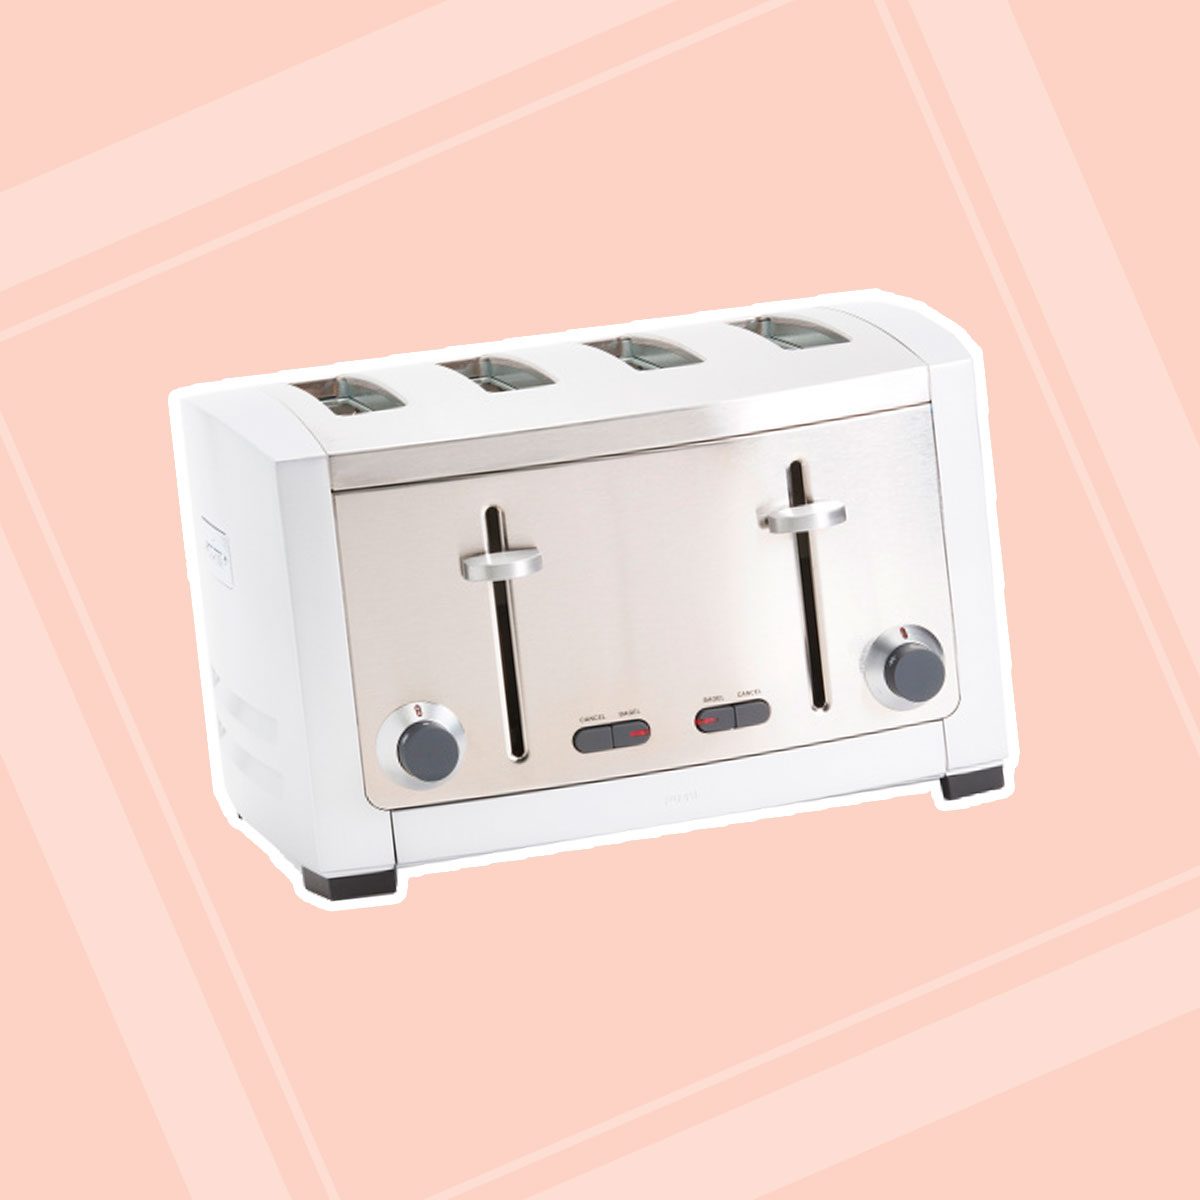 https://www.tasteofhome.com/wp-content/uploads/2020/01/All-Clad-Stainless-Steel-Toaster.jpg?fit=700%2C700